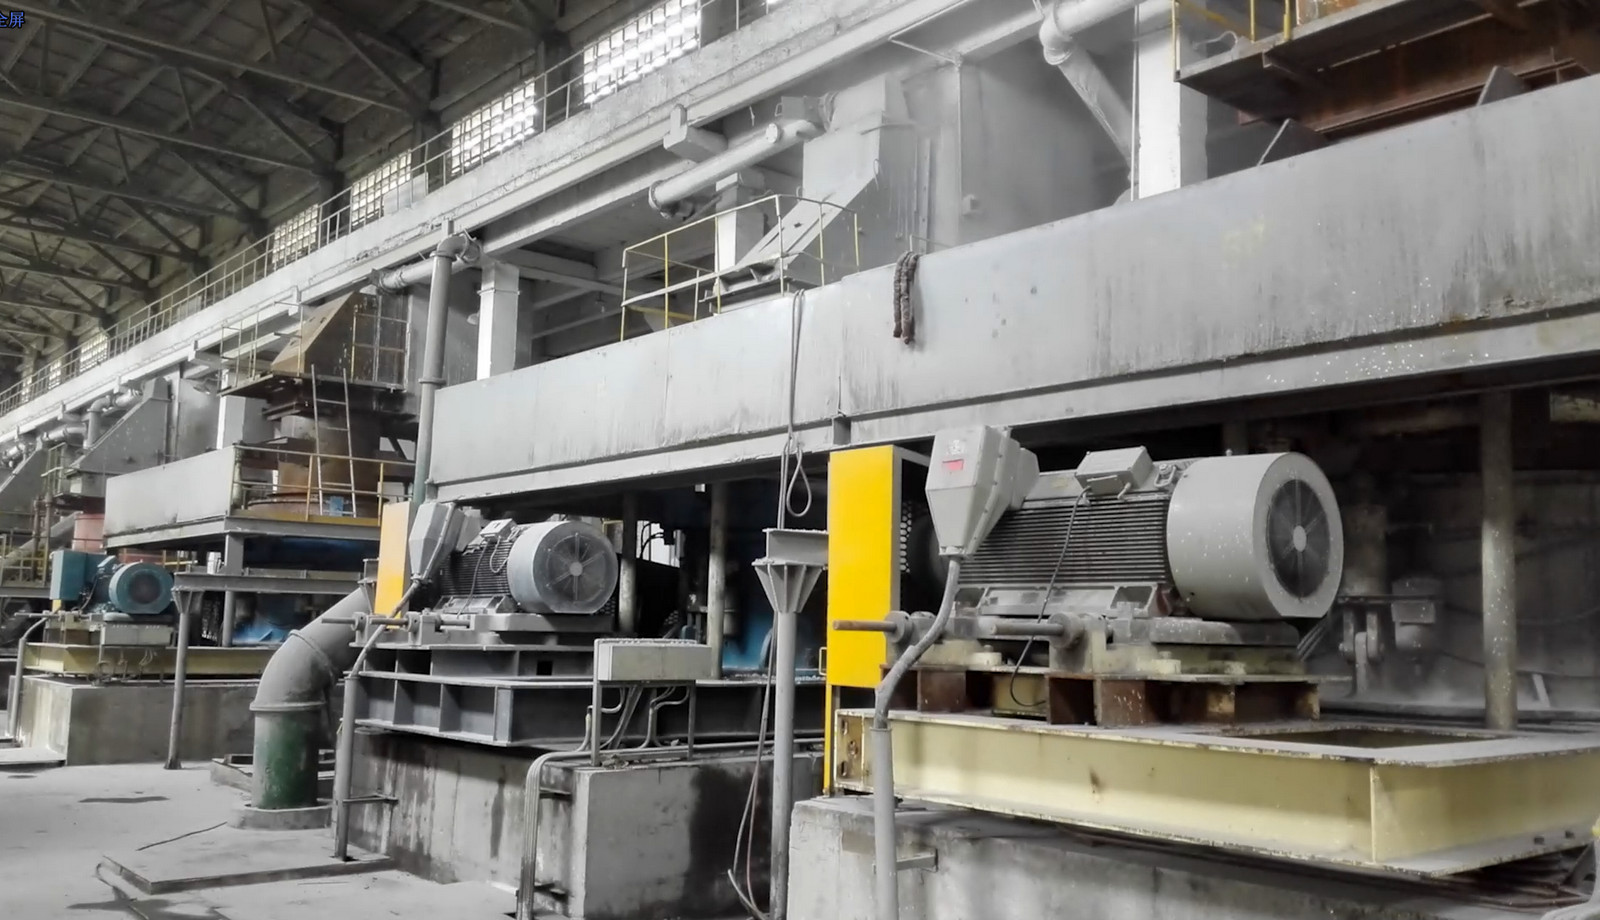 NMS multi-cylinder cone crusher helps Jiangxi Copper Yongping Copper 10,000 t/d project